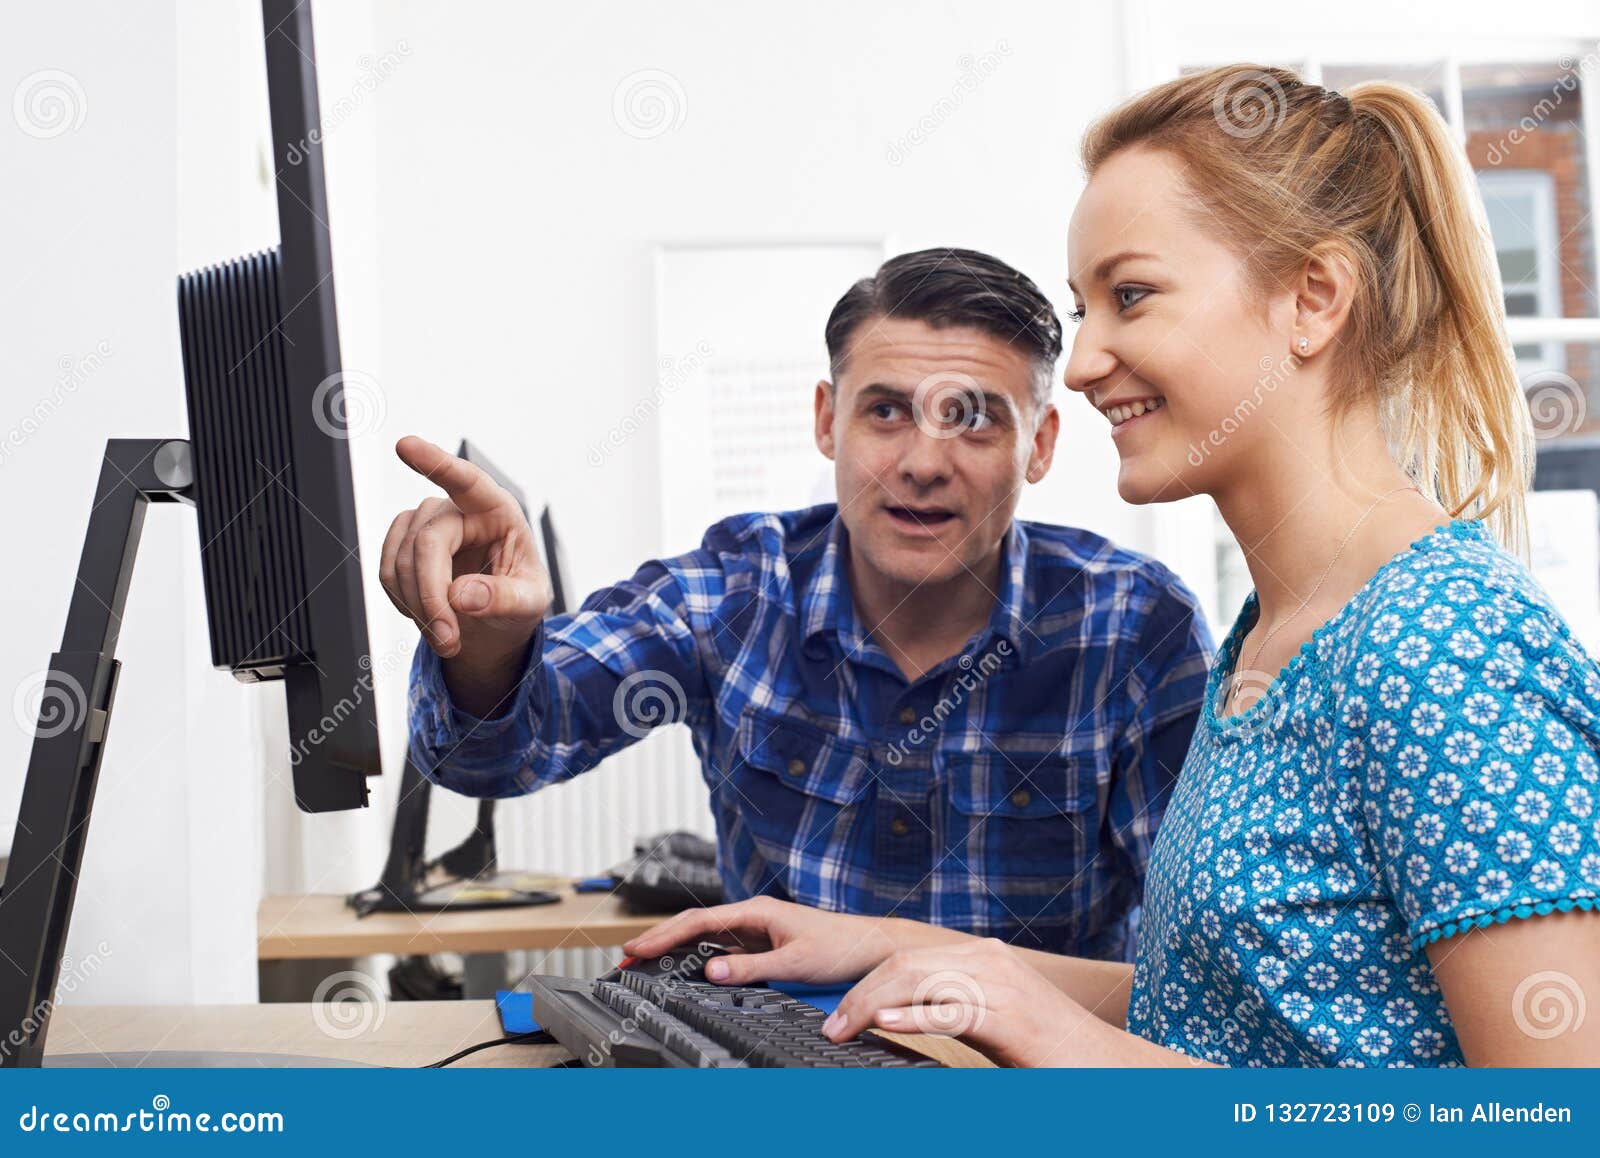 businessman giving computer training to female trainee in offic